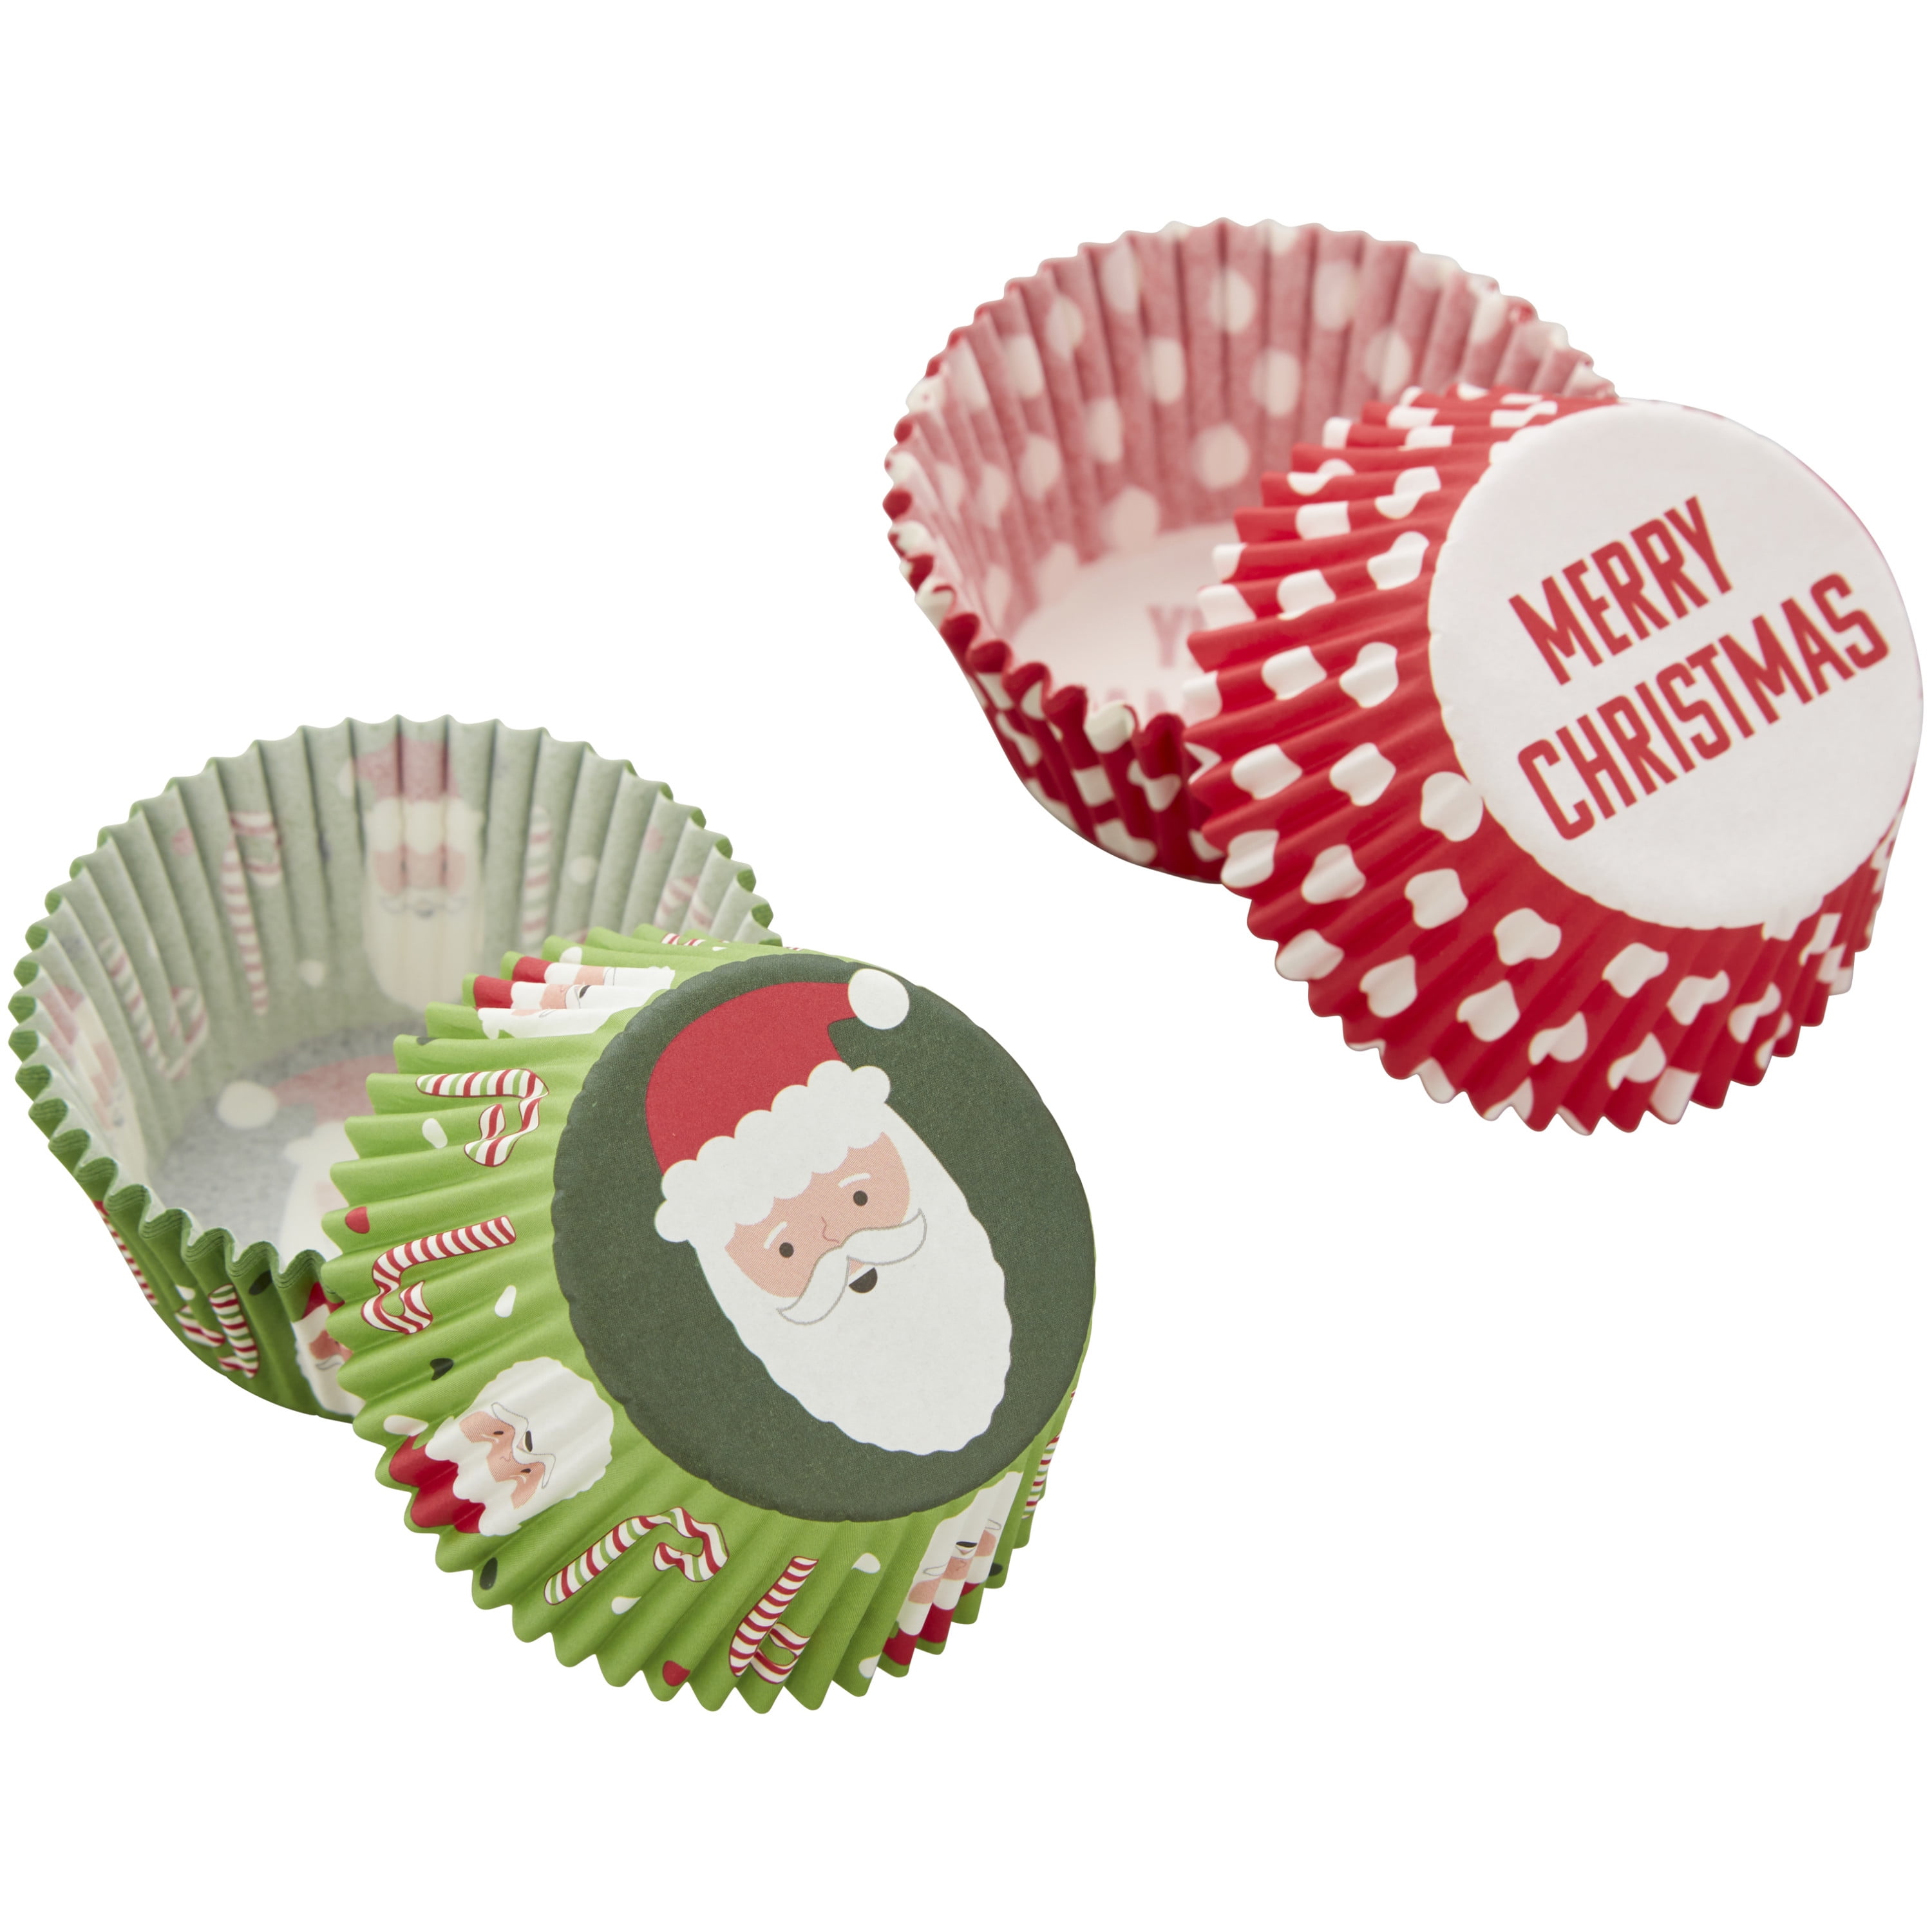 Great Value Traditional Merry Christmas Standard Cupcake Liners, 48-Count